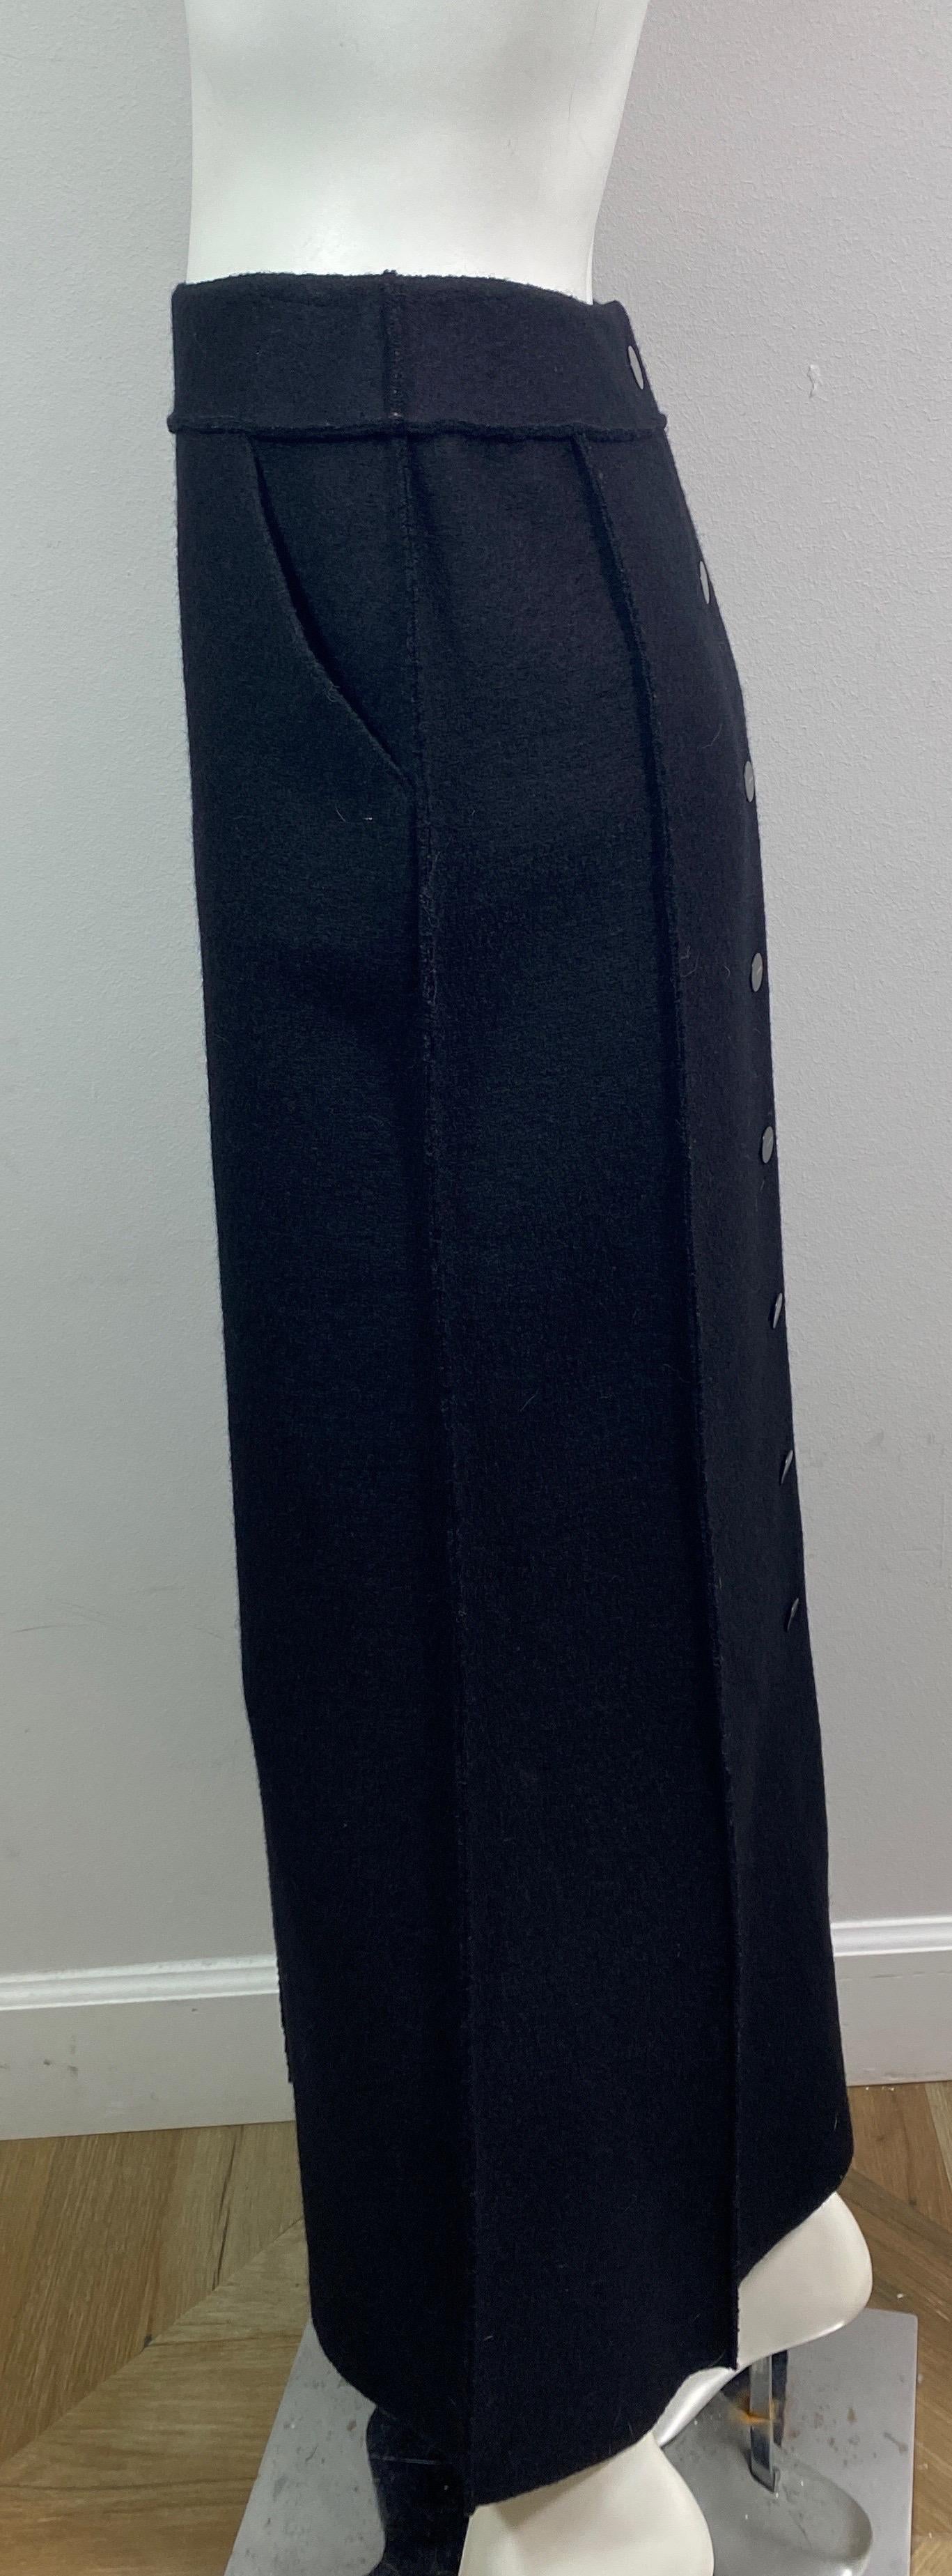 Chanel Runway Fall 1999 Black Wool Long Skirt -  Size 36 For Sale 1